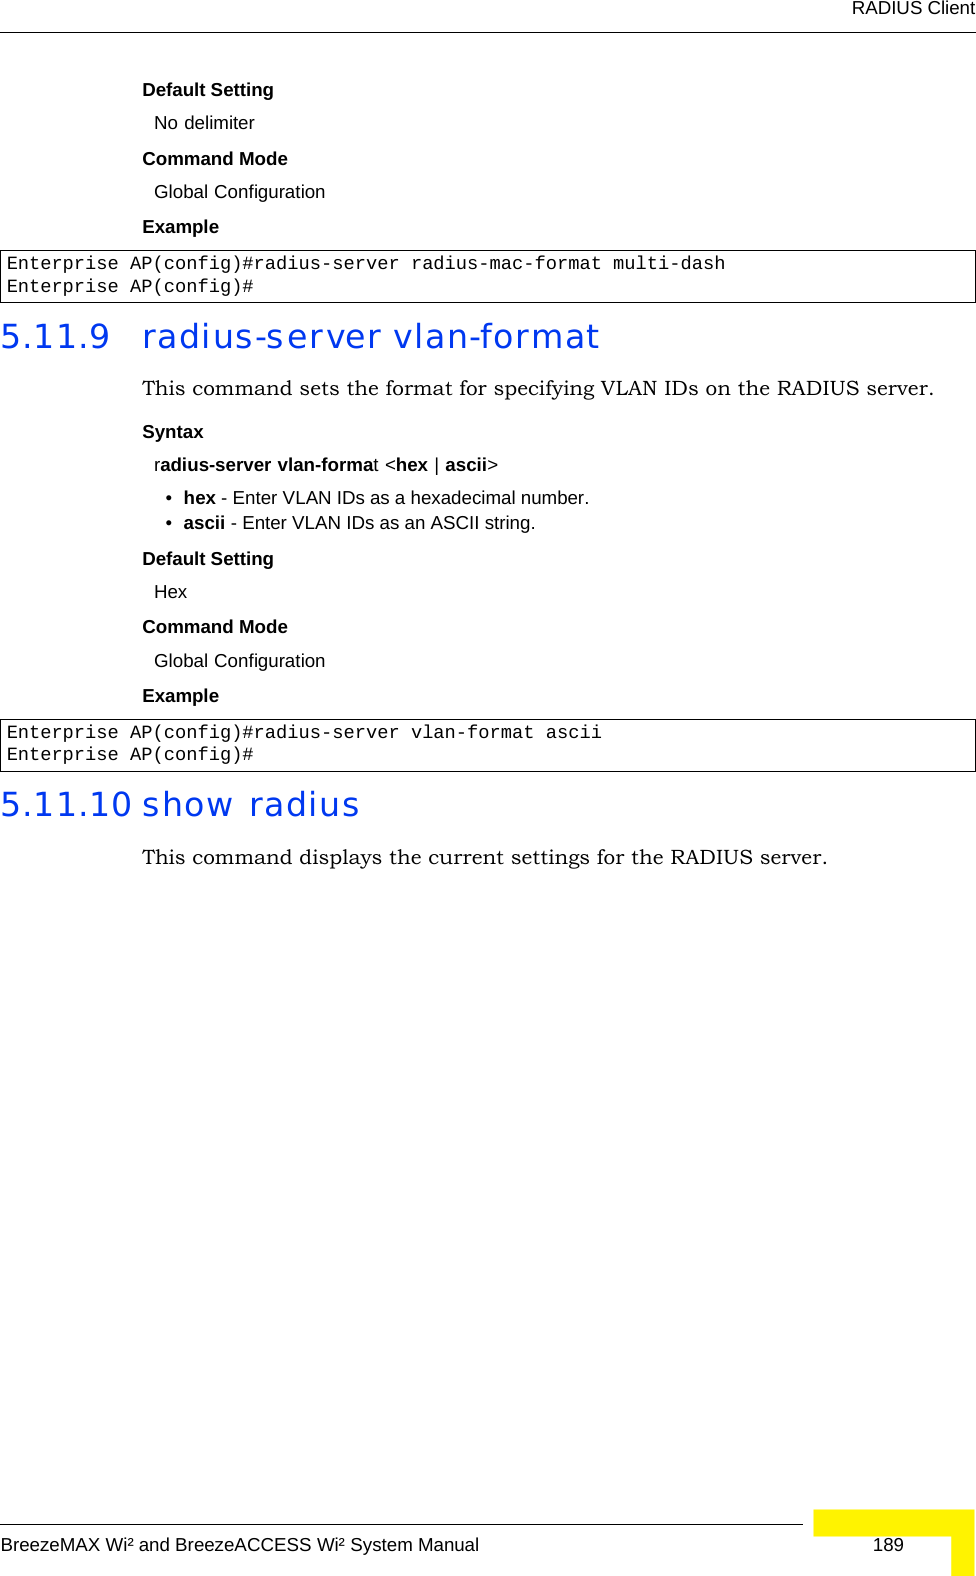 RADIUS ClientBreezeMAX Wi² and BreezeACCESS Wi² System Manual  189Default SettingNo delimiterCommand ModeGlobal ConfigurationExample 5.11.9 radius-server vlan-formatThis command sets the format for specifying VLAN IDs on the RADIUS server.Syntaxradius-server vlan-format &lt;hex | ascii&gt;•hex - Enter VLAN IDs as a hexadecimal number.•ascii - Enter VLAN IDs as an ASCII string.Default SettingHexCommand ModeGlobal ConfigurationExample 5.11.10 show radiusThis command displays the current settings for the RADIUS server.Enterprise AP(config)#radius-server radius-mac-format multi-dashEnterprise AP(config)#Enterprise AP(config)#radius-server vlan-format asciiEnterprise AP(config)#